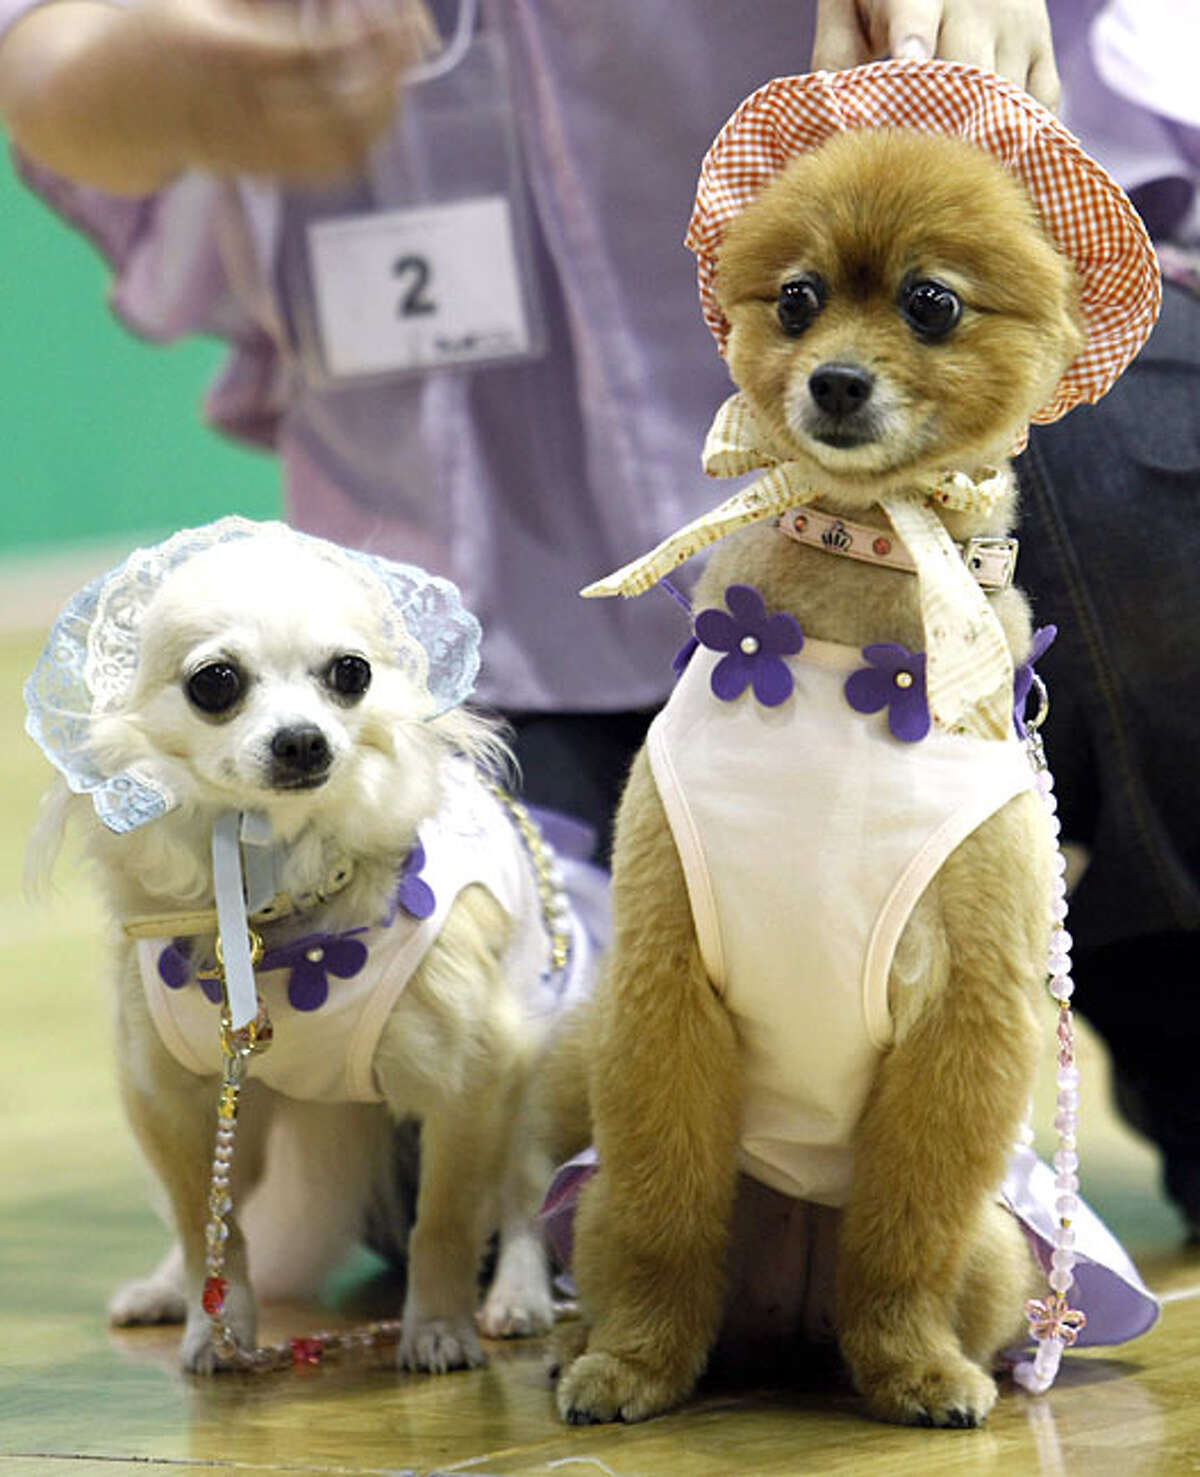 Chihuahua "Roze," left, and toy poodle "Monaka" pose for pictures at pet show in Makuhari, near Tokyo, Sunday, May 2, 2010.